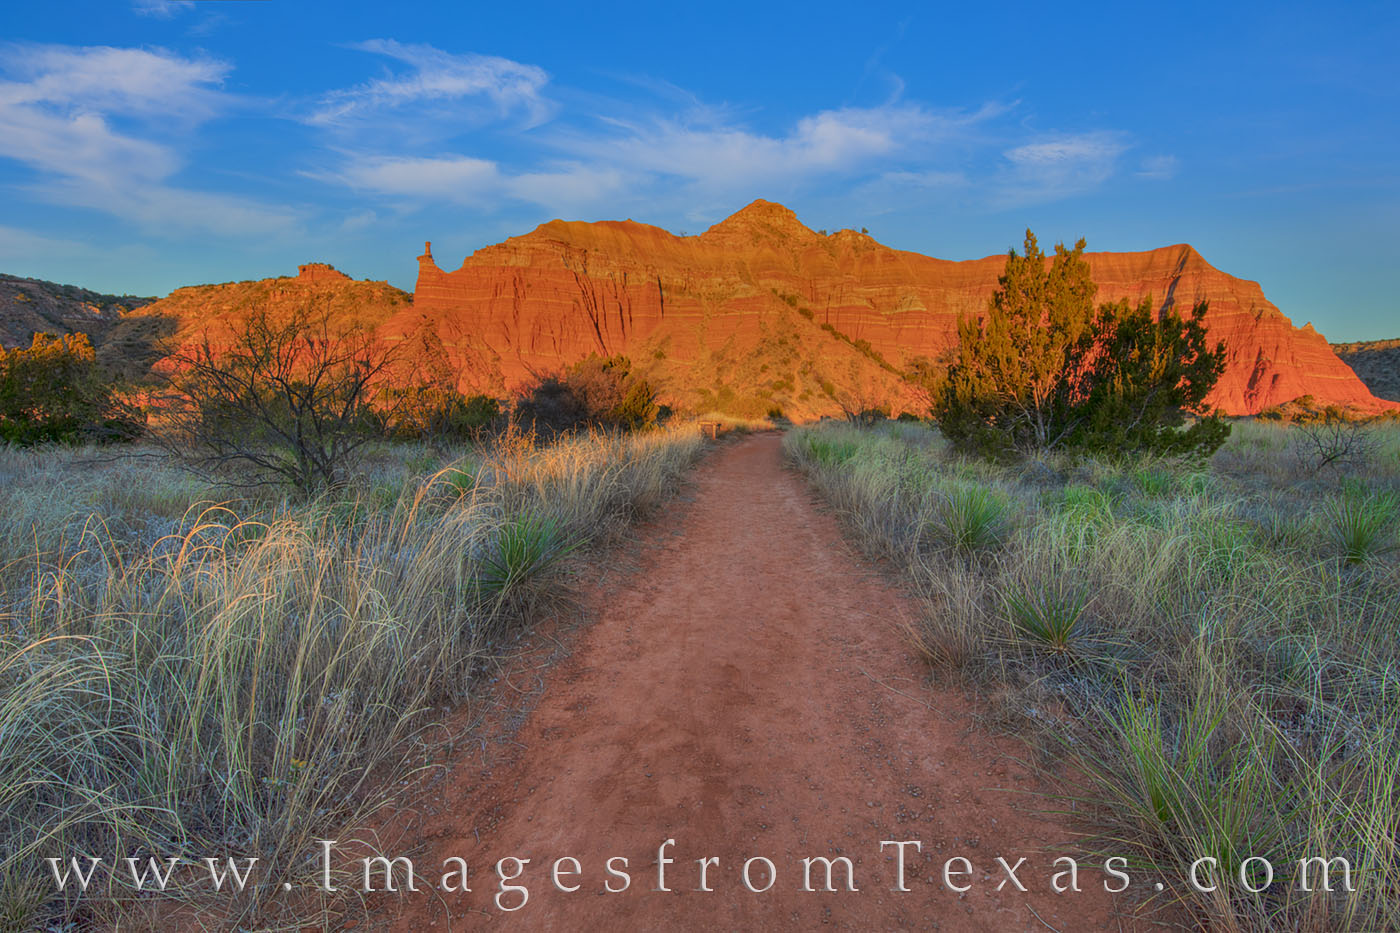 The Lighthouse Trail in Palo Duro Canyon leads through beautiful country in the red rocks and cliffs of this state park near...